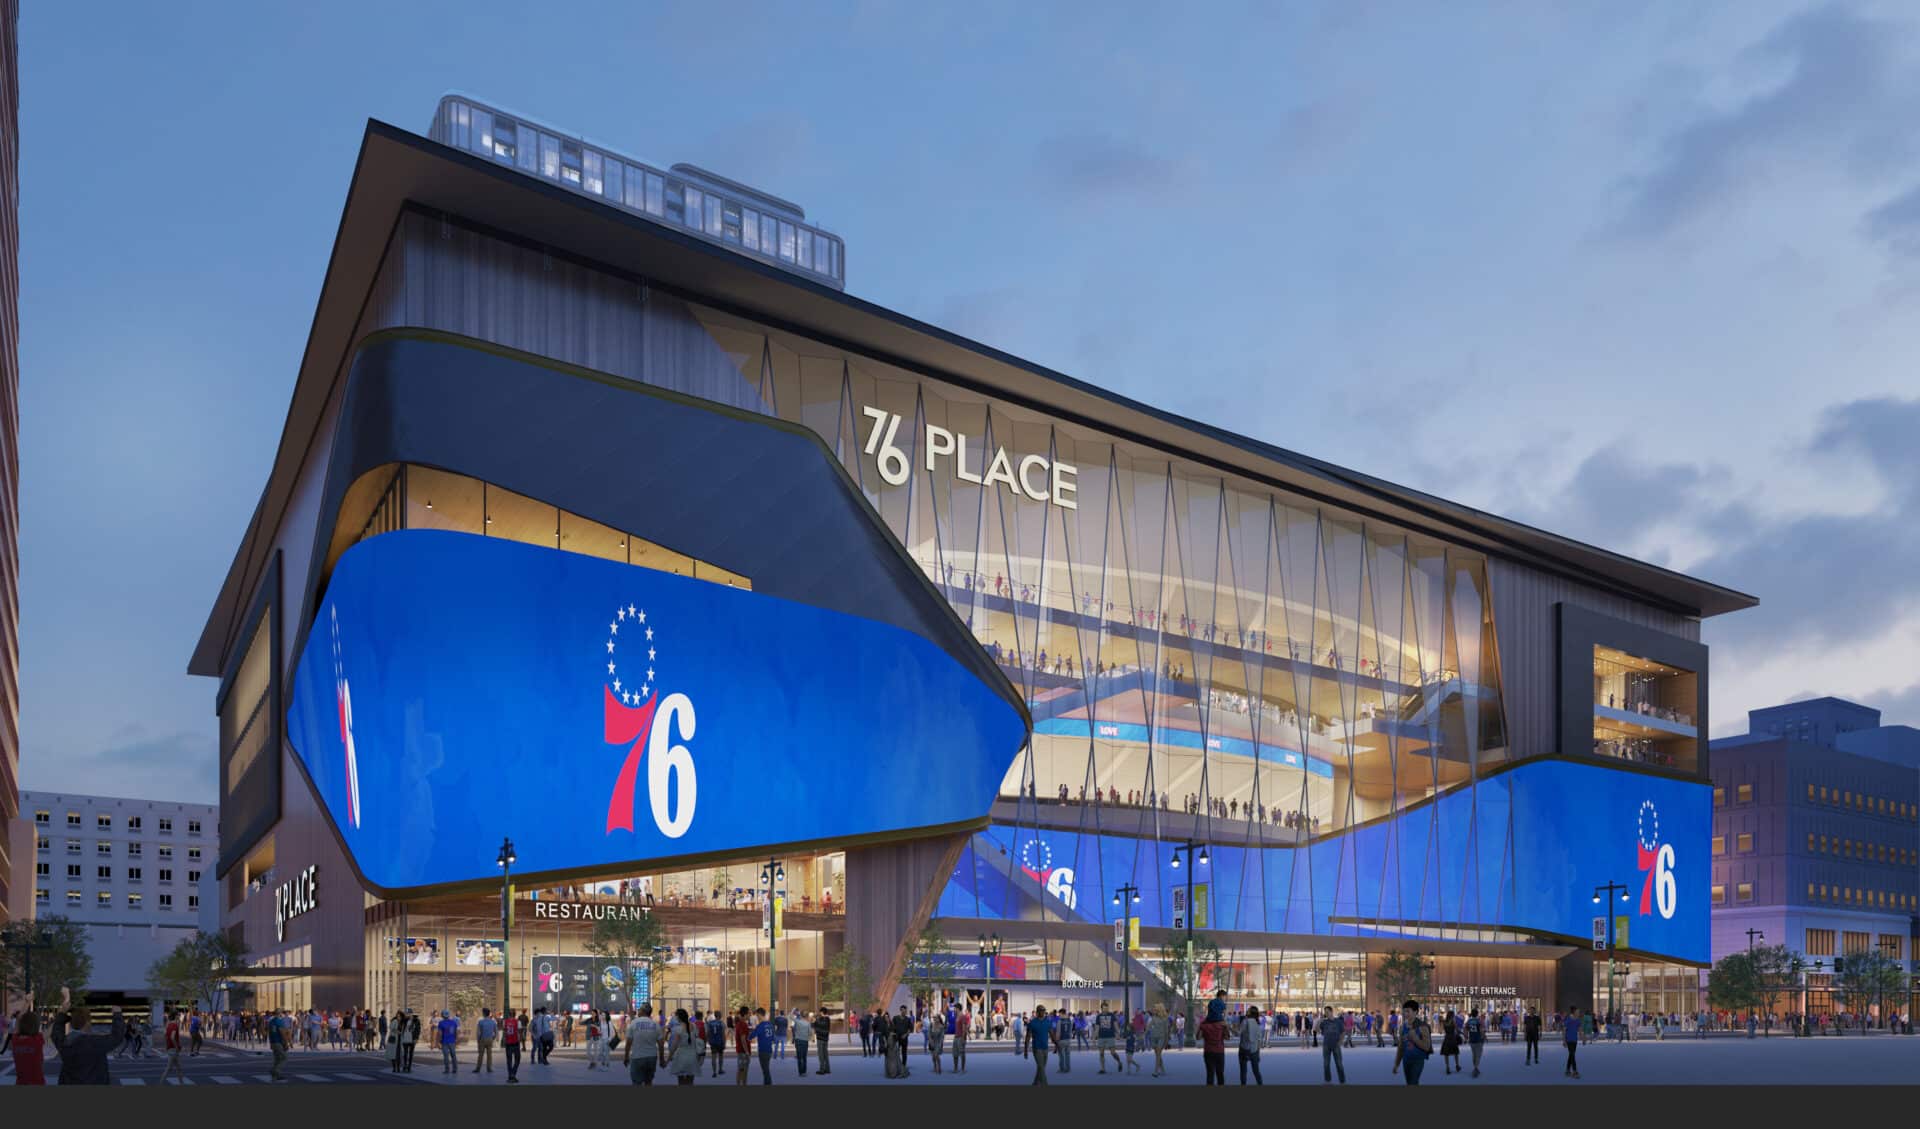 76ers Upping The Game With Arena Plans